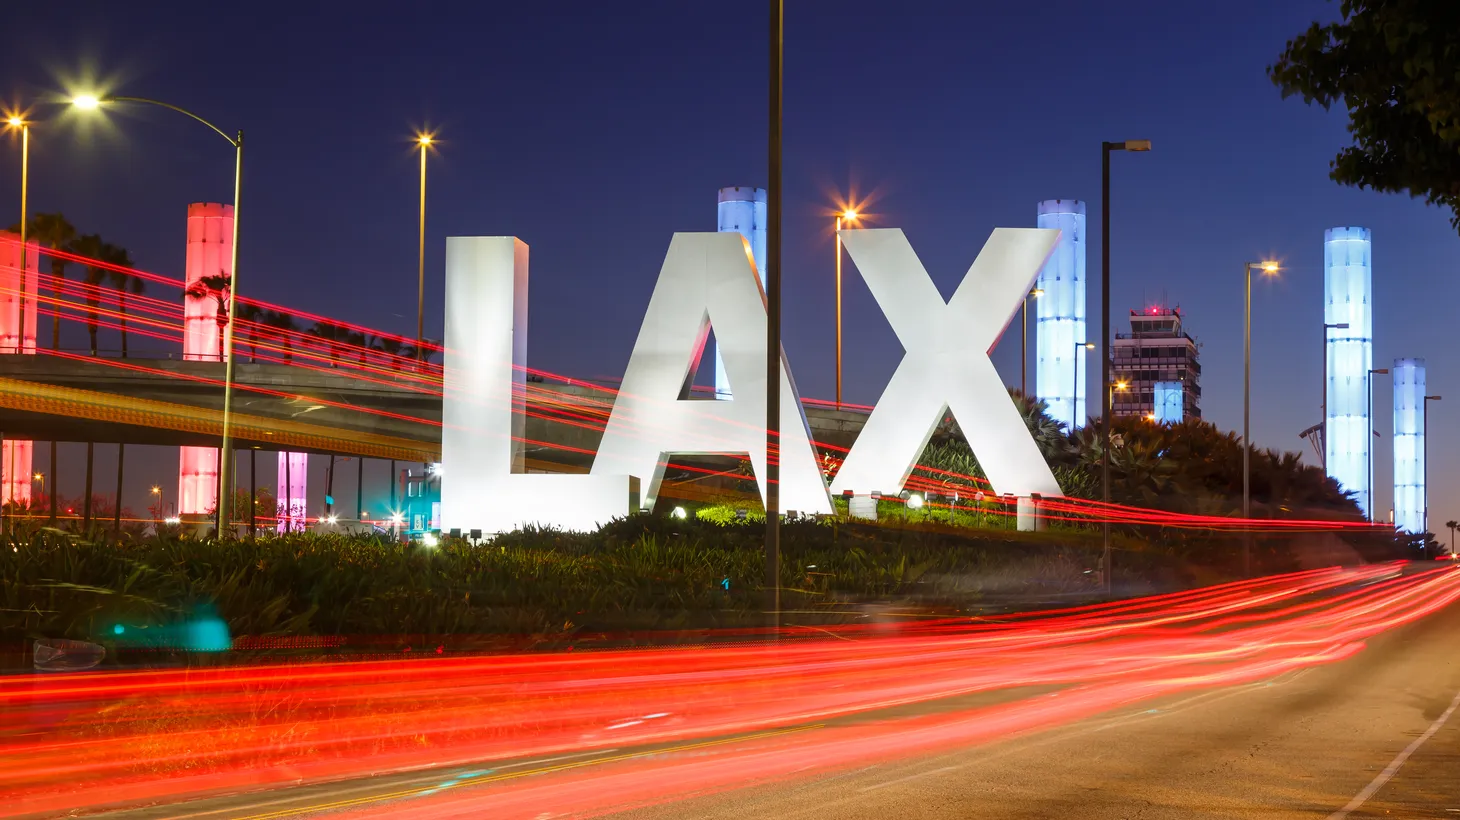 “It's that last mile between the LAX area and the terminal that seems to be becoming more of a Dante-esque hellscape,” says KCRW listener Erin Bergren.